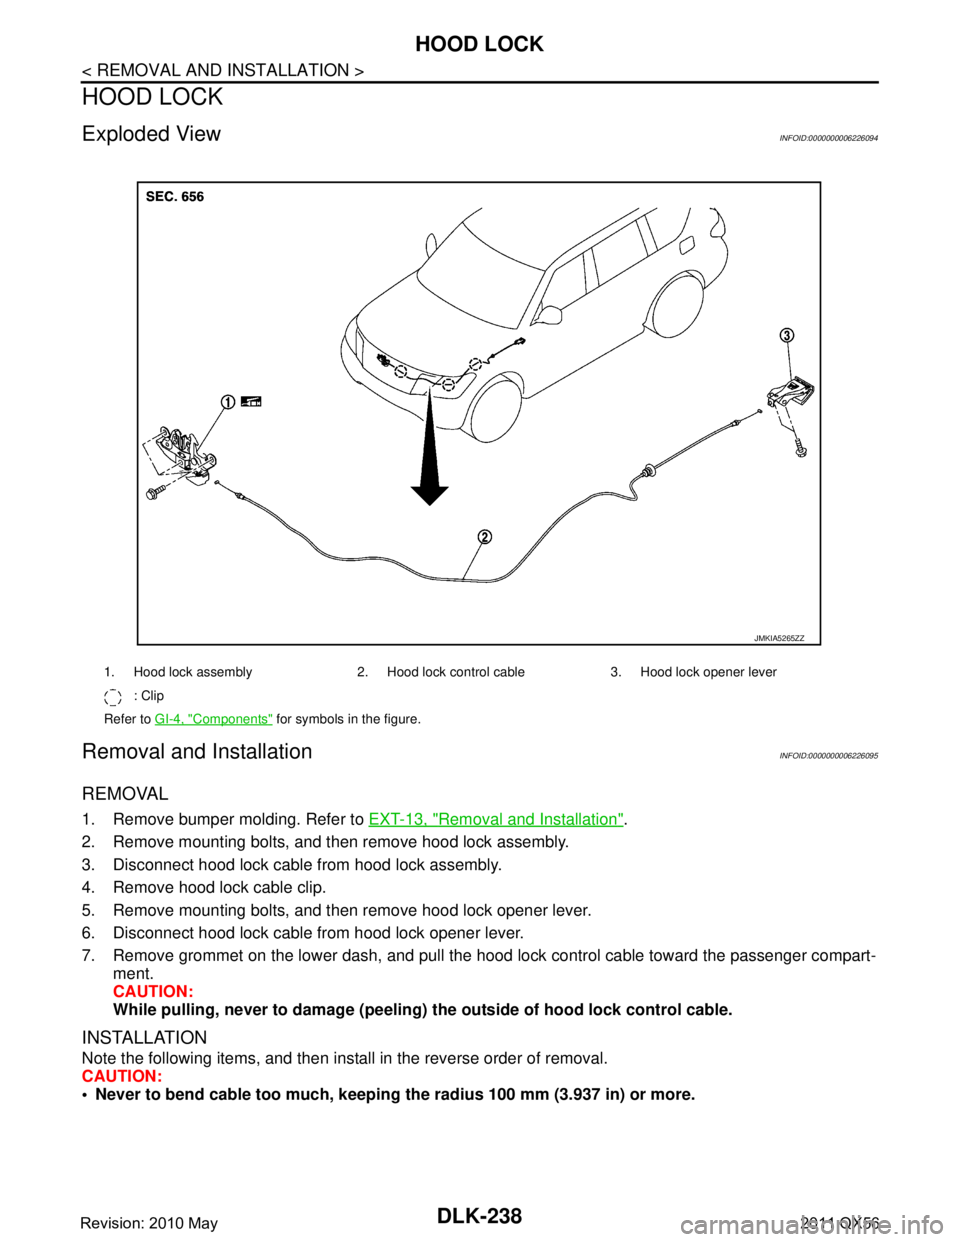 INFINITI QX56 2011  Factory Service Manual 
DLK-238
< REMOVAL AND INSTALLATION >
HOOD LOCK
HOOD LOCK
Exploded ViewINFOID:0000000006226094
Removal and InstallationINFOID:0000000006226095
REMOVAL
1. Remove bumper molding. Refer to EXT-13, "Remov